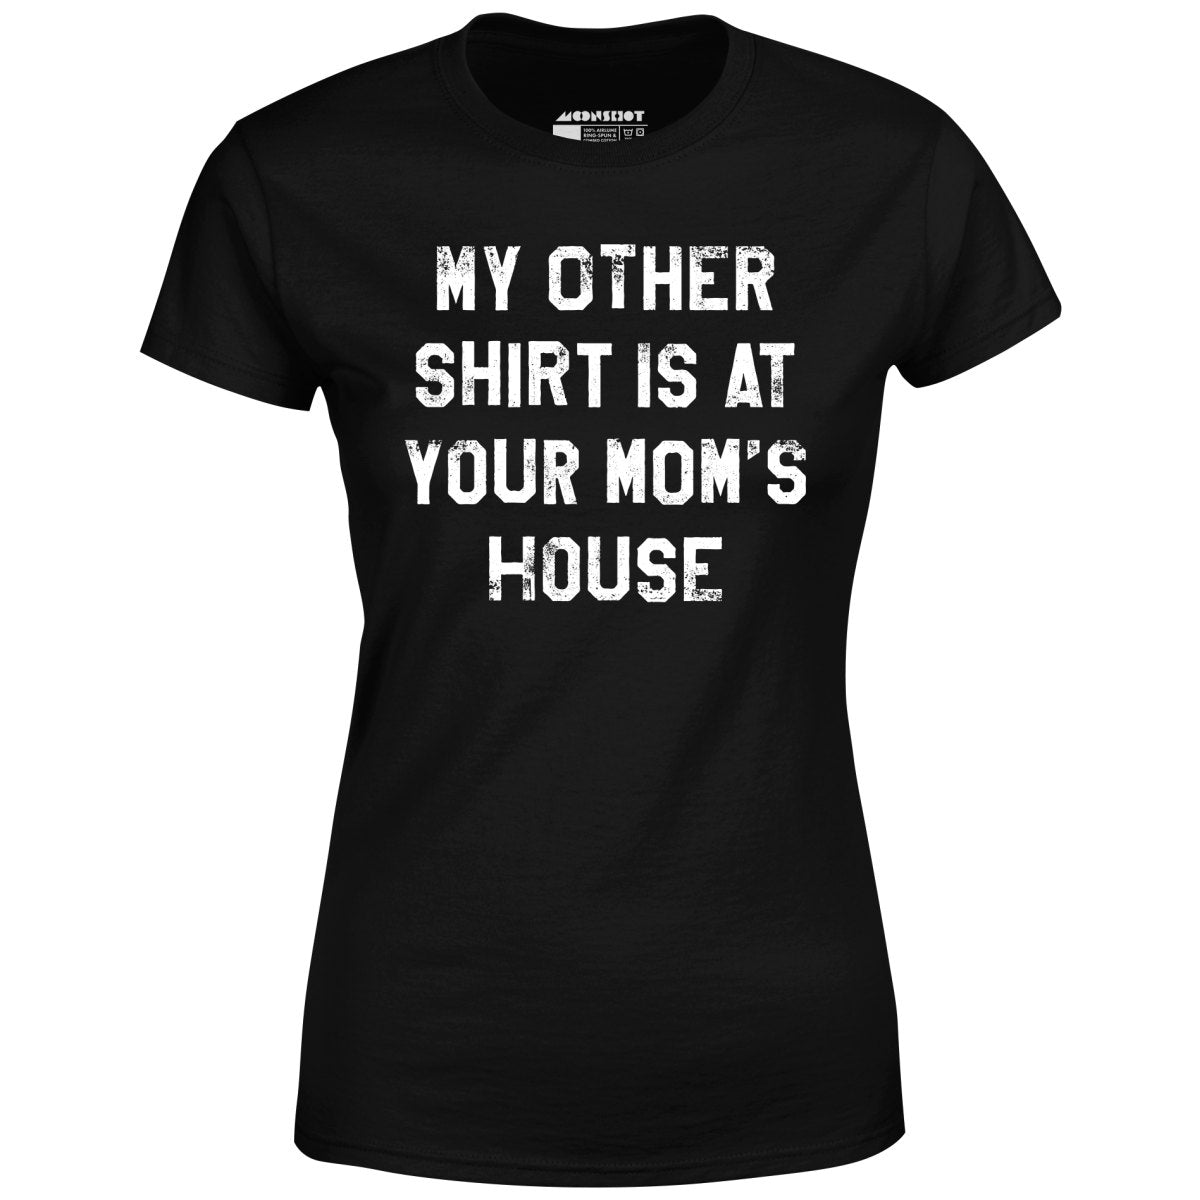 My Other Shirt Is At Your Mom's House - Women's T-Shirt